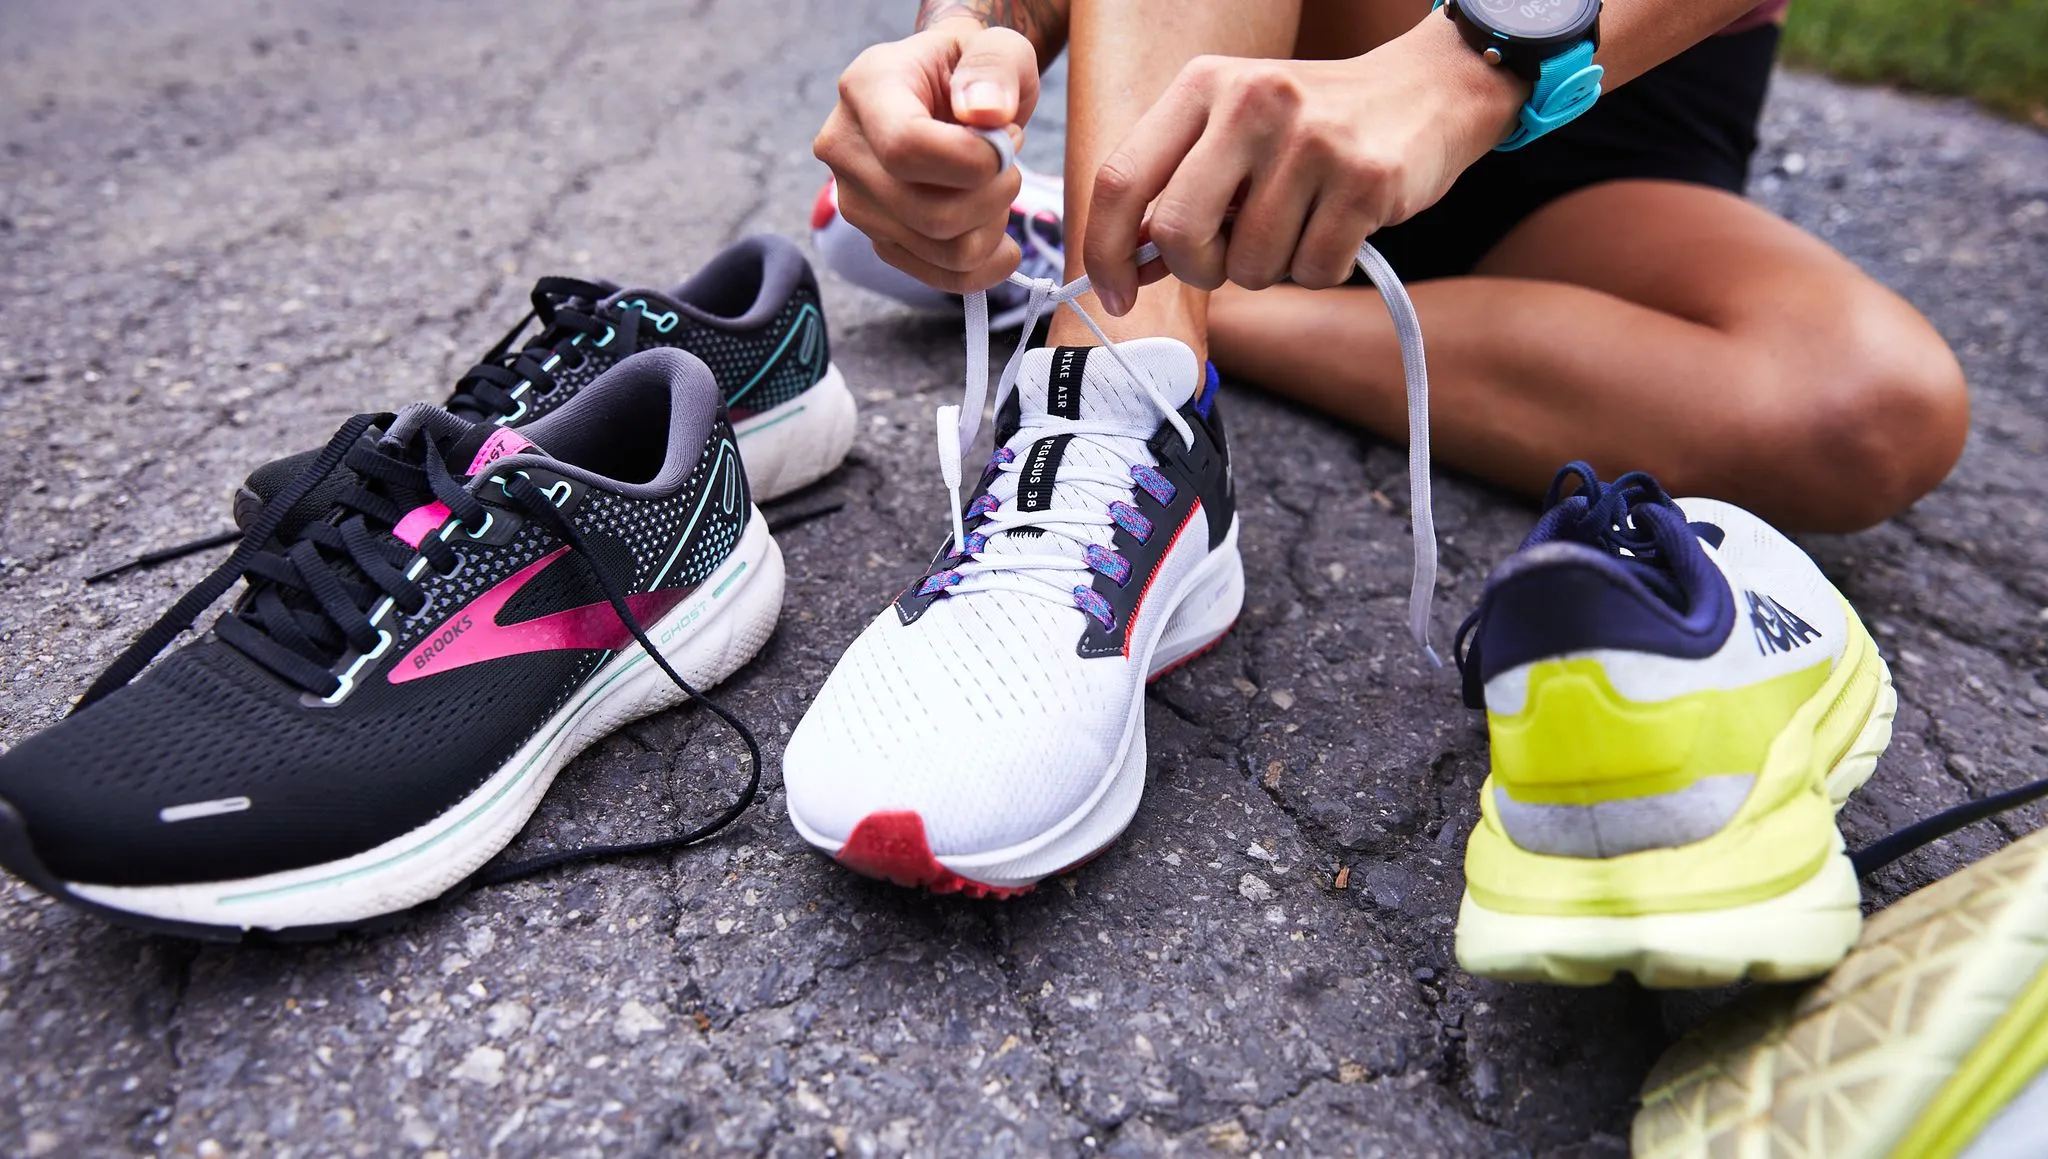 What Running Shoes Are Good For High Arches?